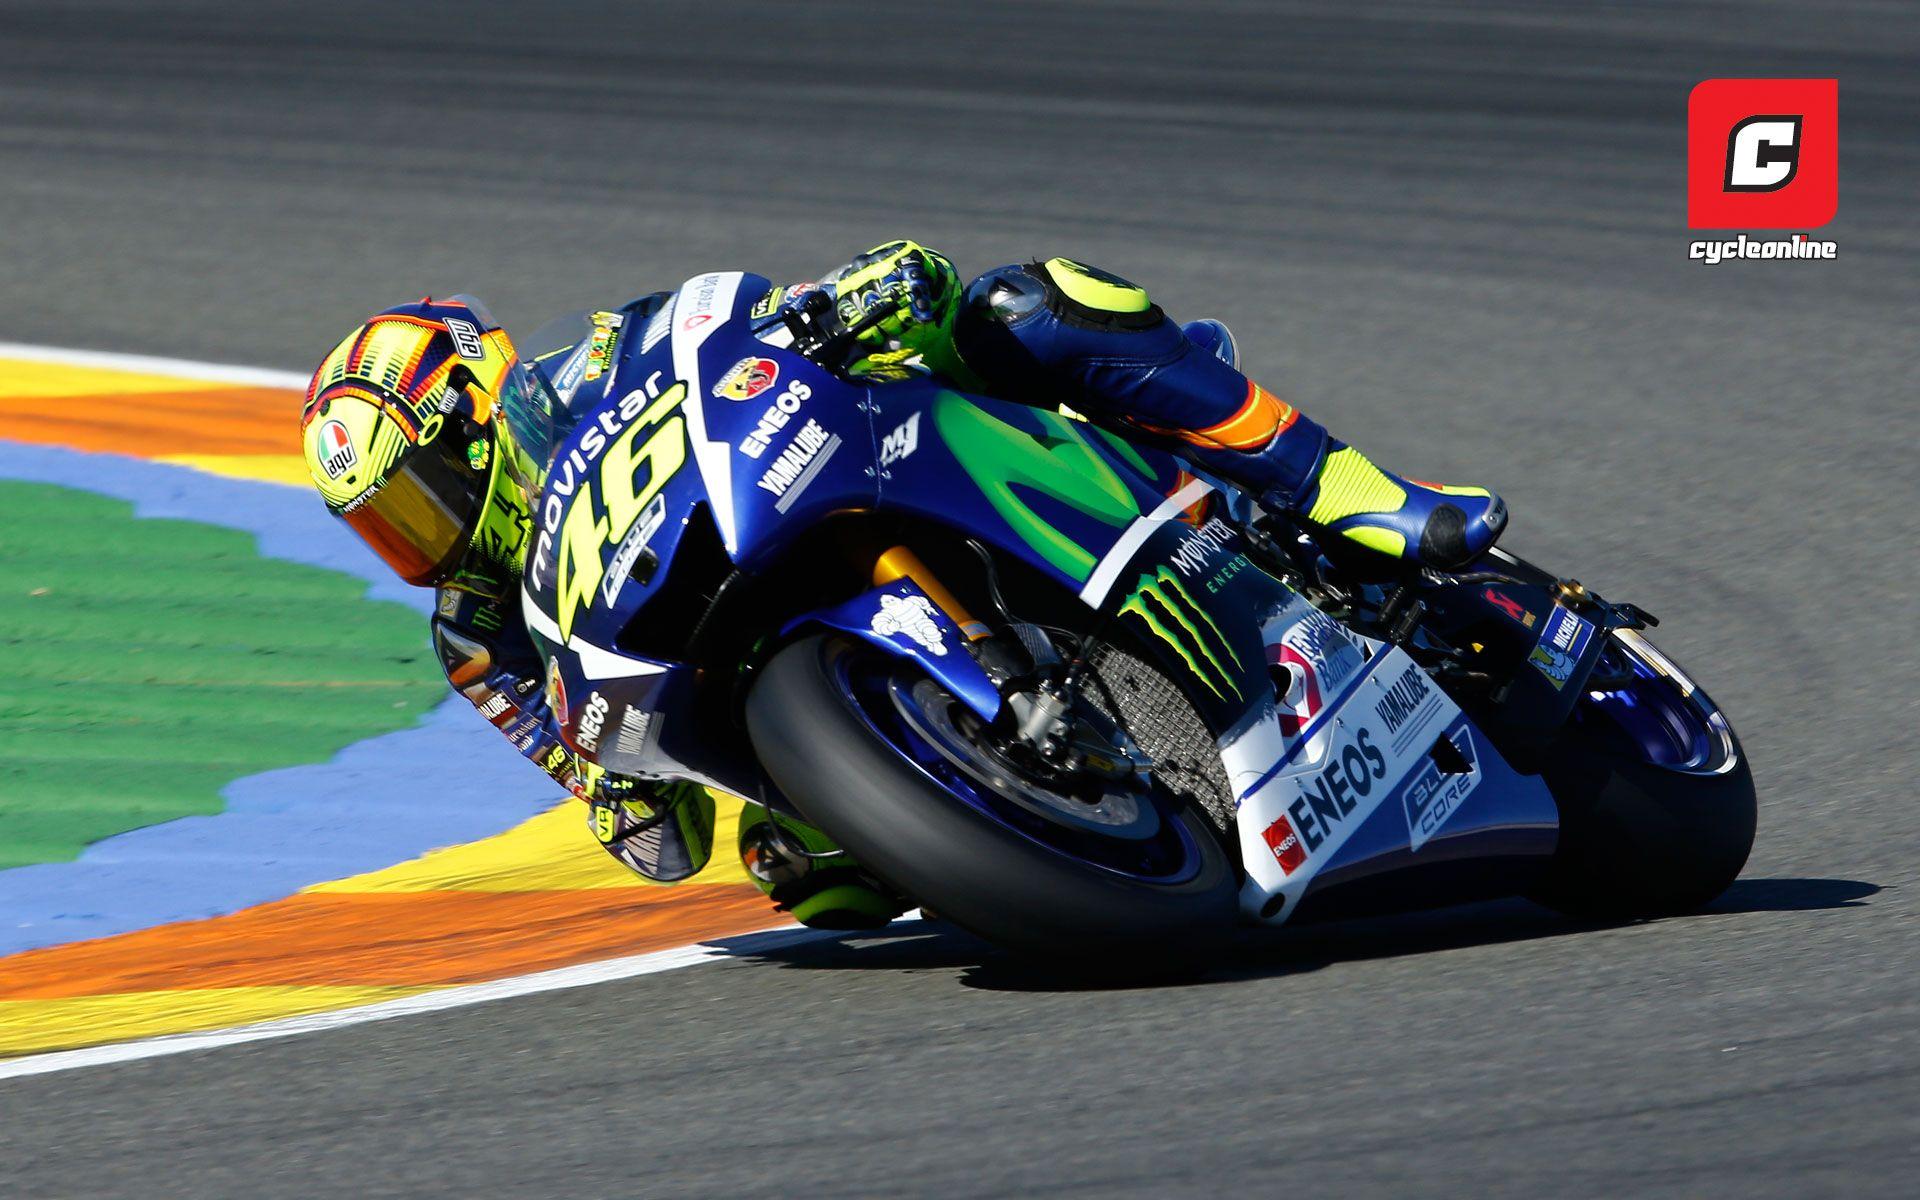 Download wallpapers 4k, Valentino Rossi, grunge art, MotoGP, raceway,  Yamaha YZR-M1, Valentino Rossi on track, blue abstract rays, racing bikes,  Monster Energy Yamaha MotoGP, Yamaha for desktop with resolution 3840x2400.  High Quality